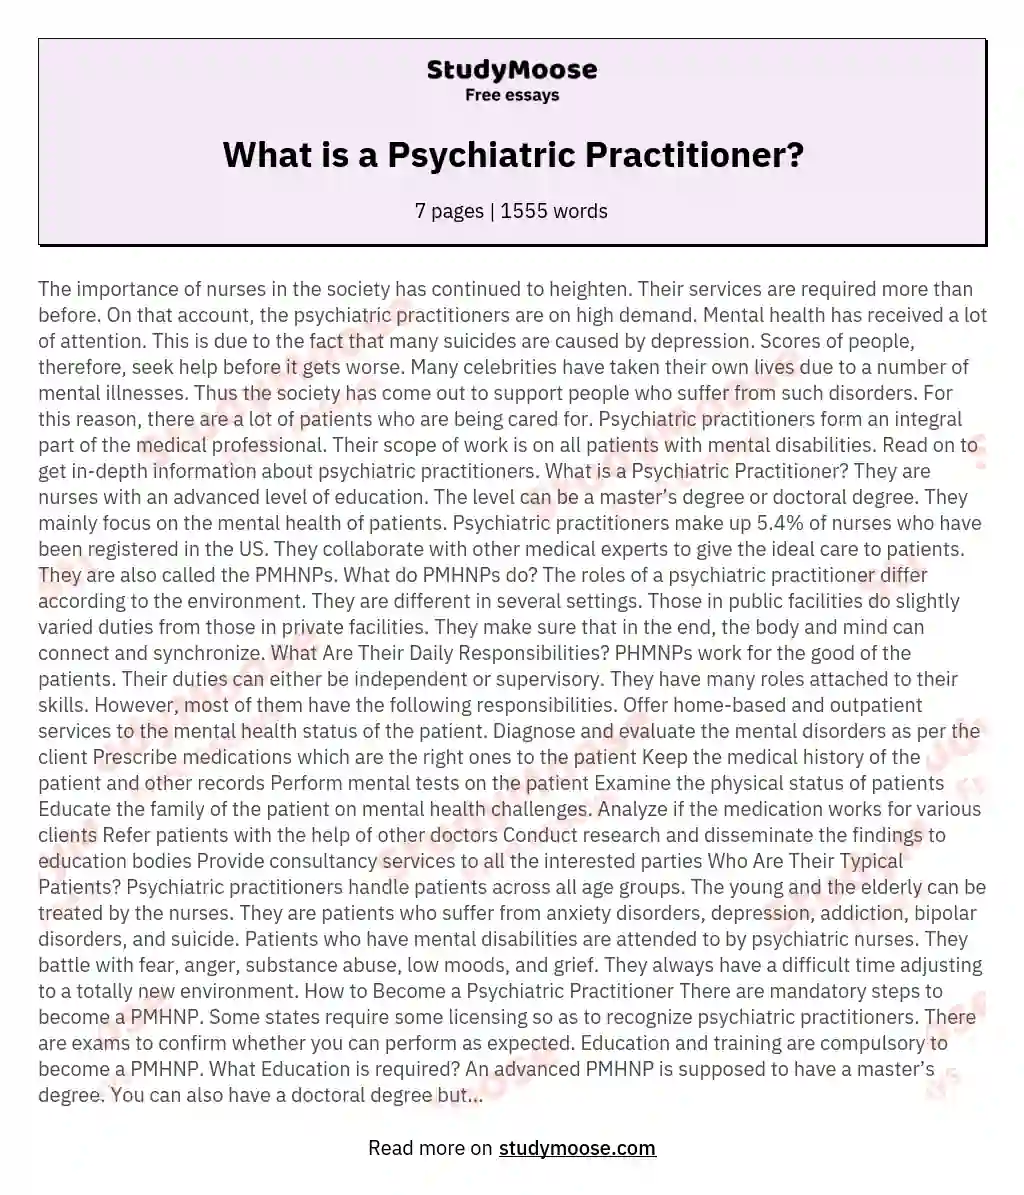 What is a Psychiatric Practitioner?